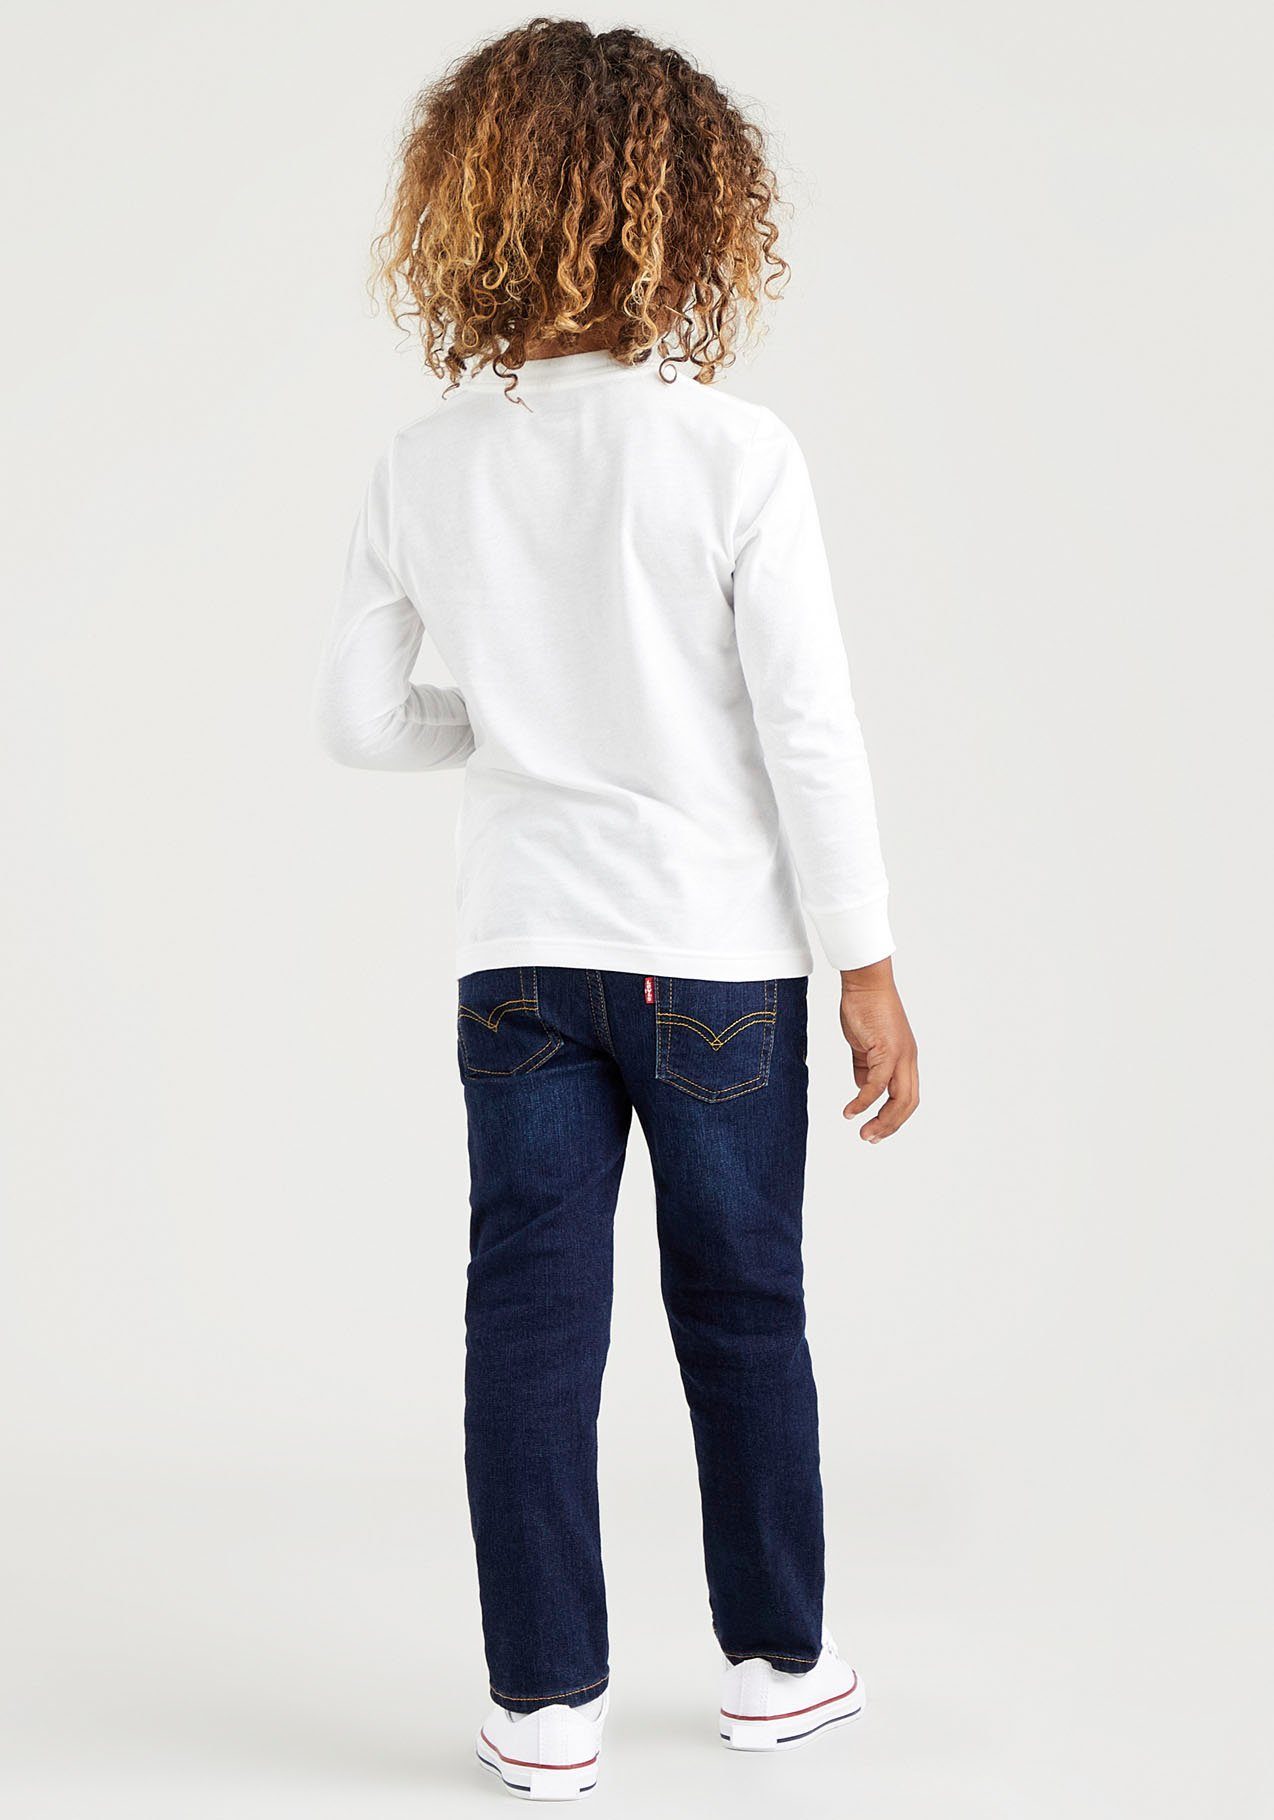 L/S CHESTHIT BATWING Kids TEE Langarmshirt Levi's® for weiß BOYS